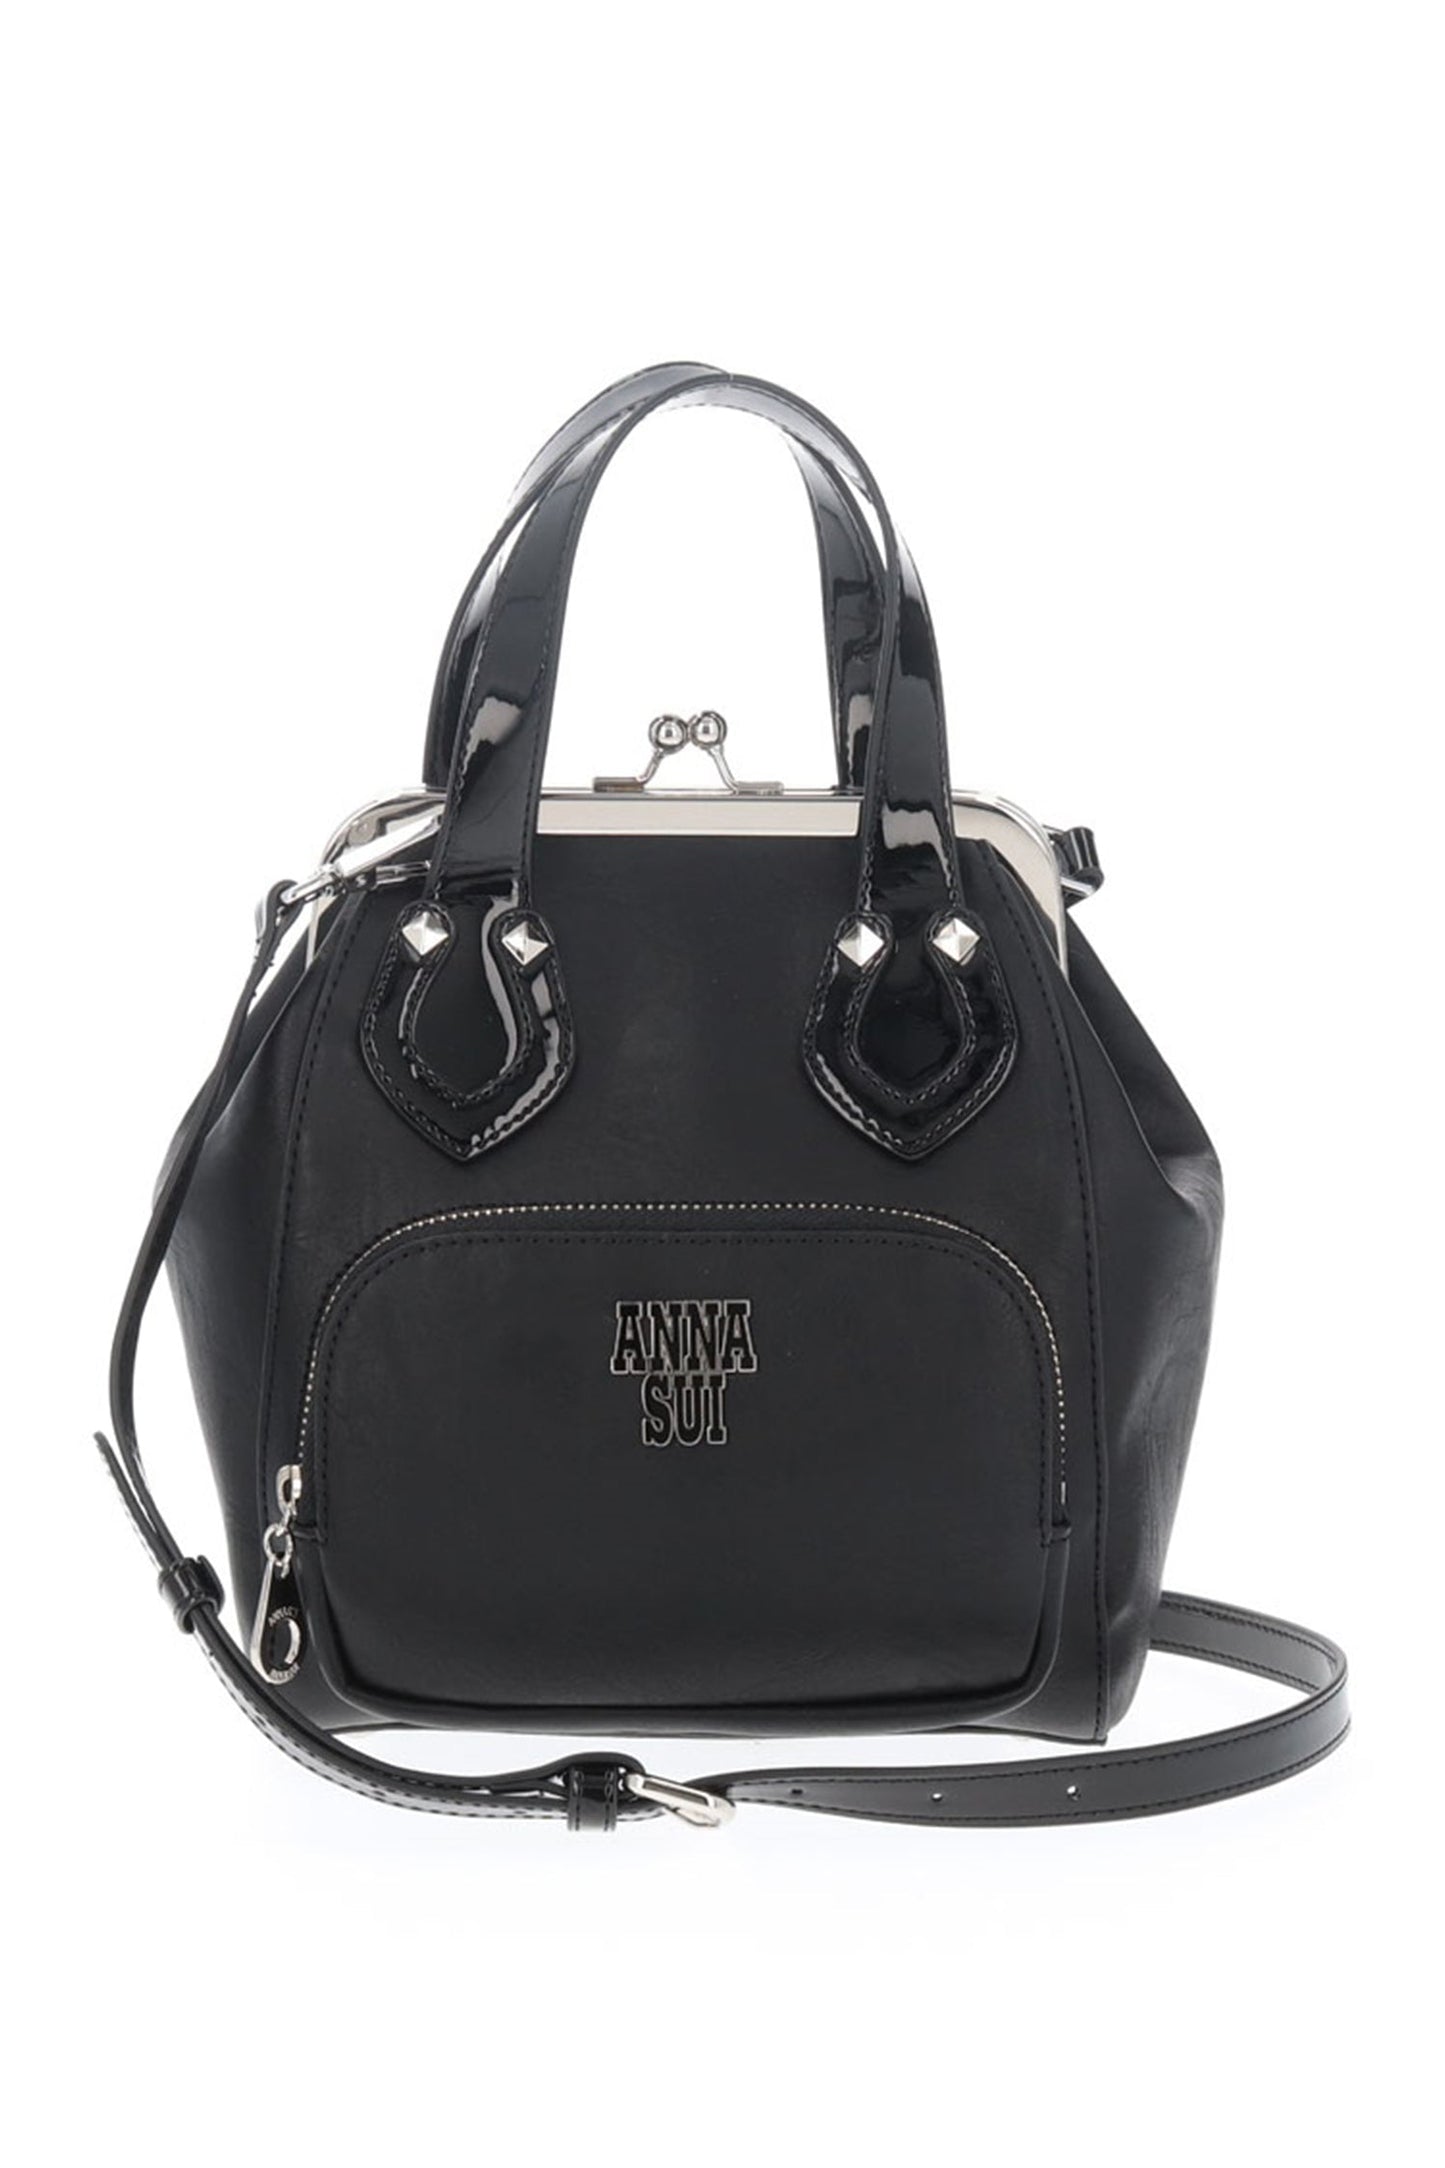 Bag Black, zipper pocket on the front, Anna Sui label, 2 handles, metallic Clasp clipper on top